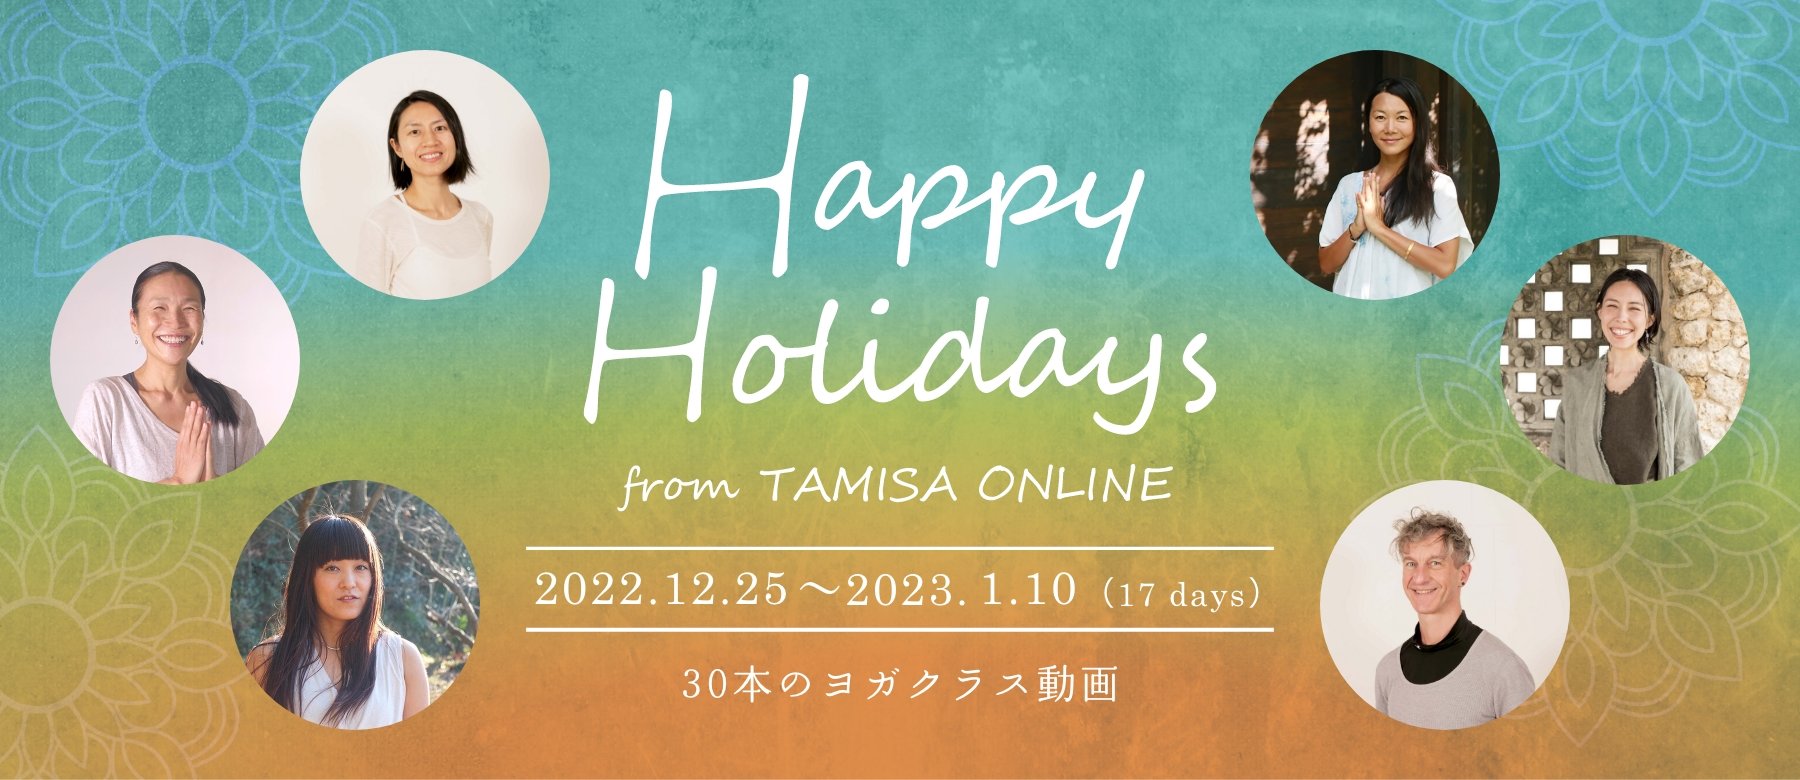 Happy Holidays from TAMISA ONLINE